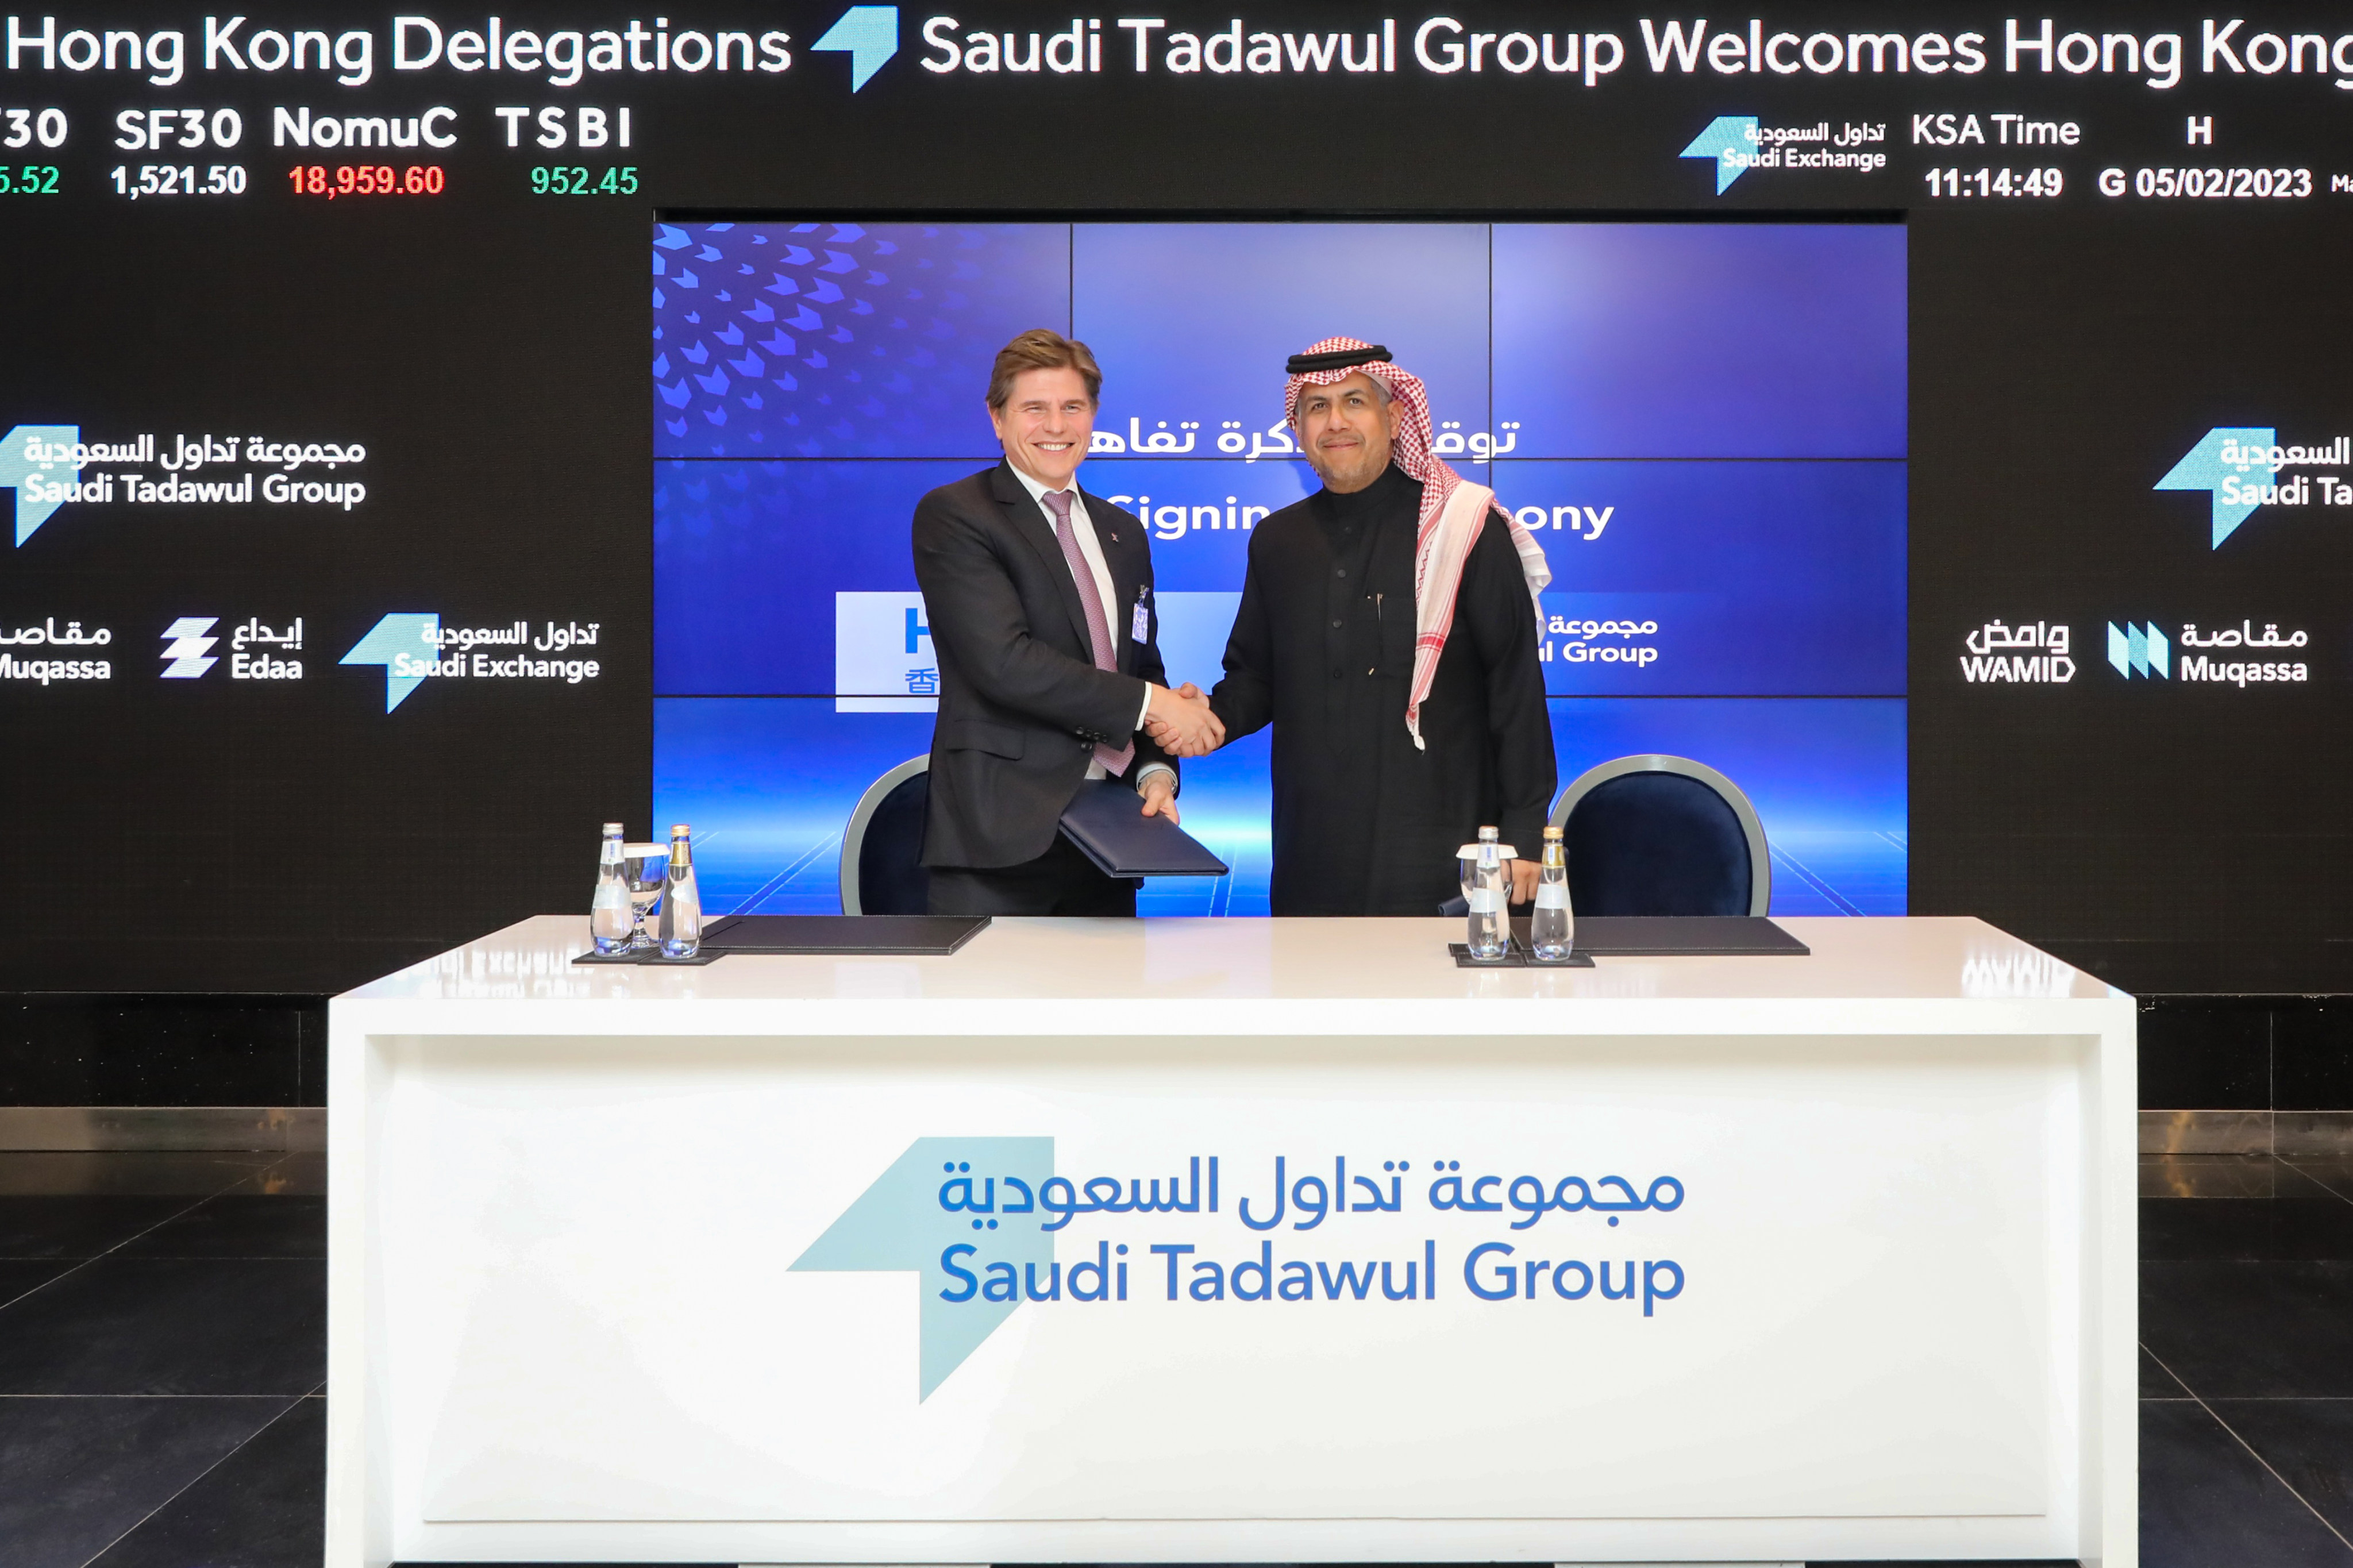 HKEX CEO Nicolas Aguzin (left) and Saudi Tadawul Group CEO Khalid Al Hussan signed an MOU during the Hong Kong delegation’s visit to Saudi Exchange on 5 February 2023.  Photo: HKEX